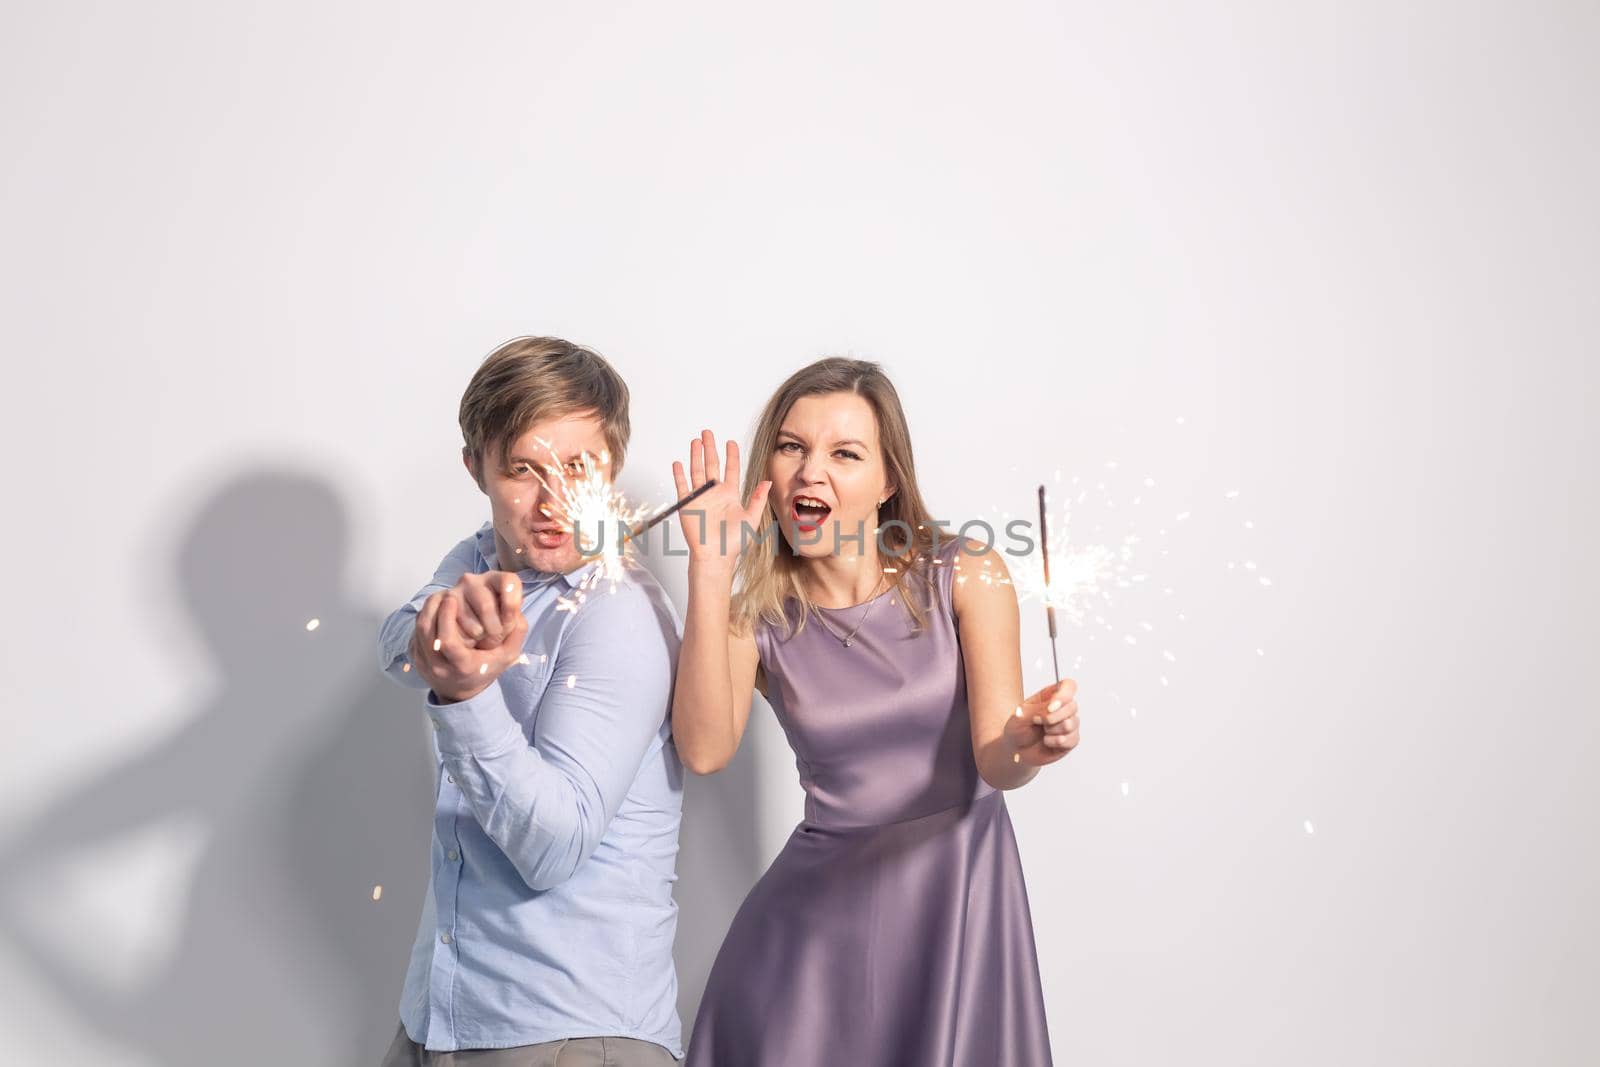 Fun, love and holiday concept - man and woman fooling around with sparklers.